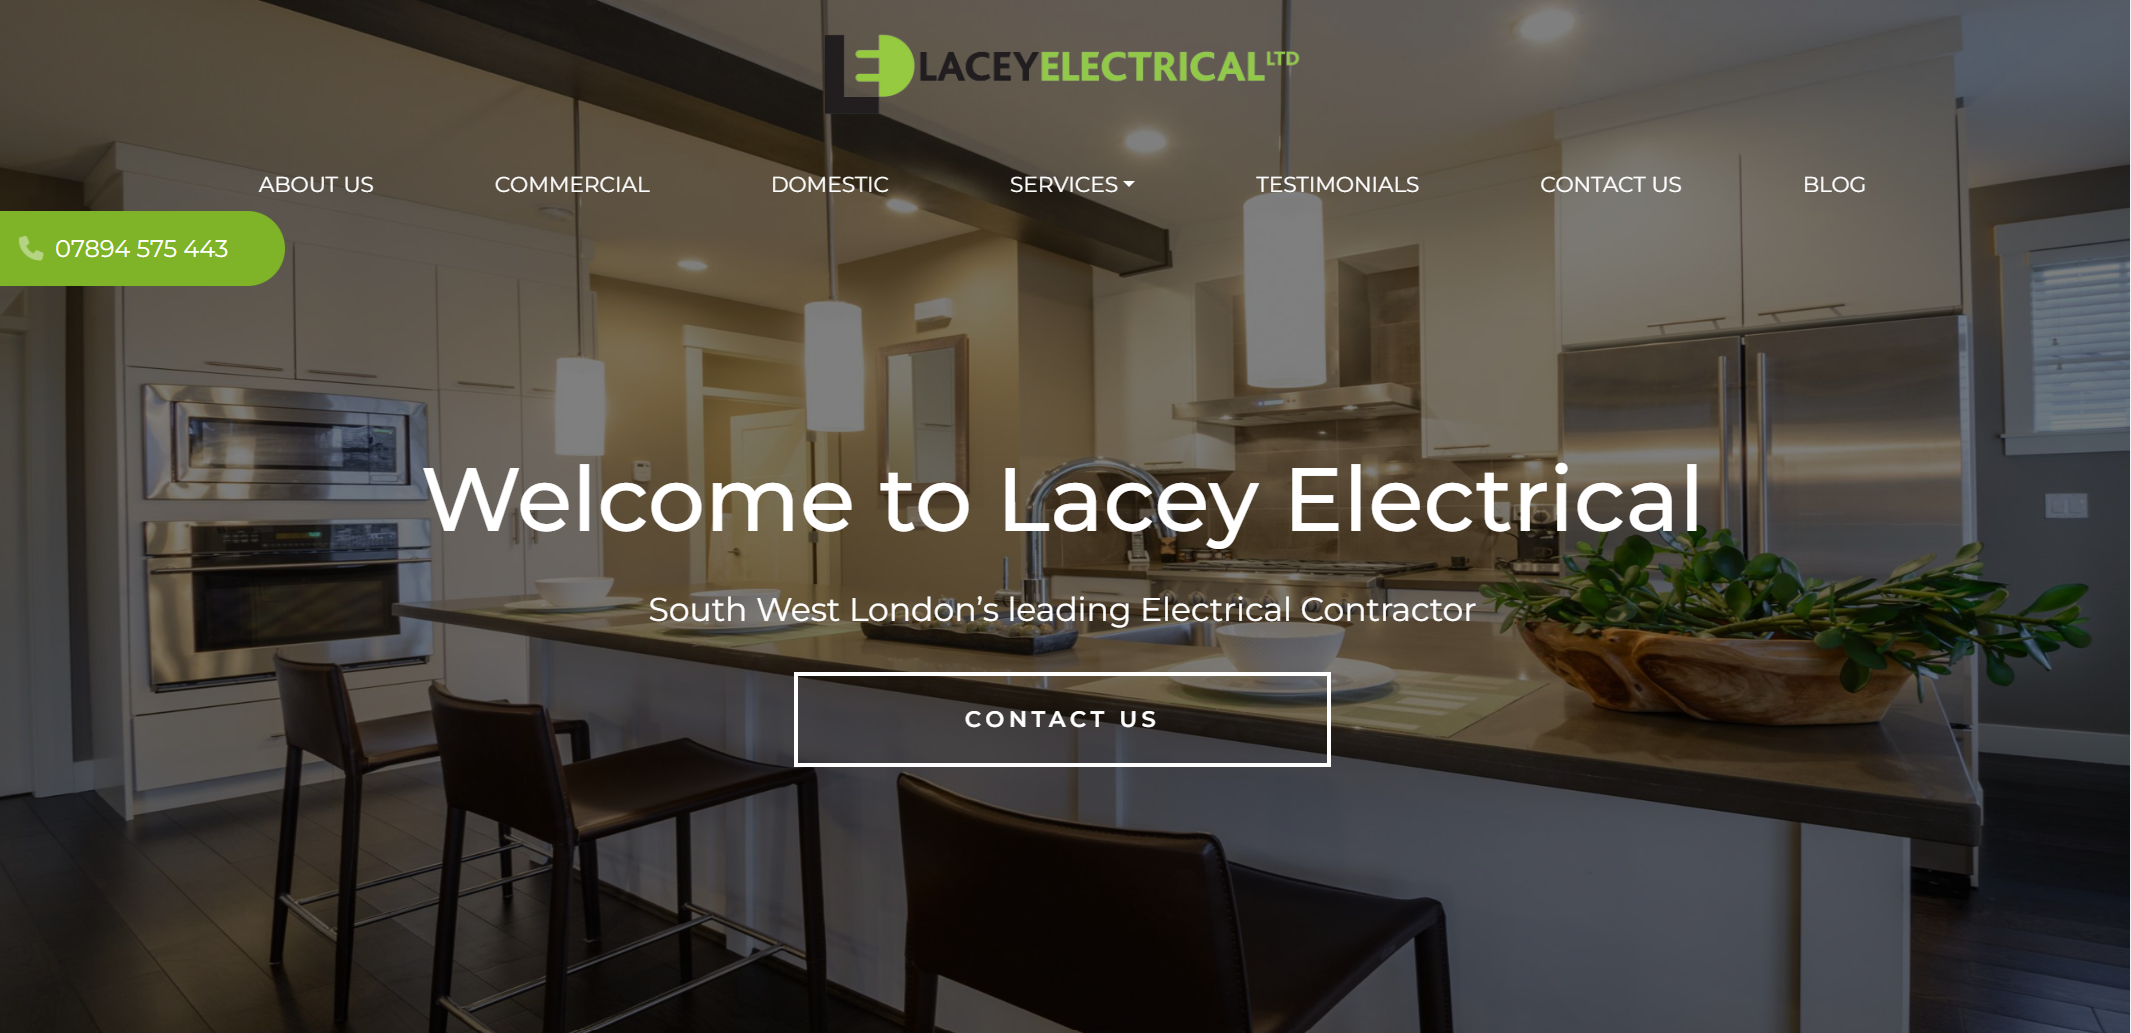 Lacey Electrical Image